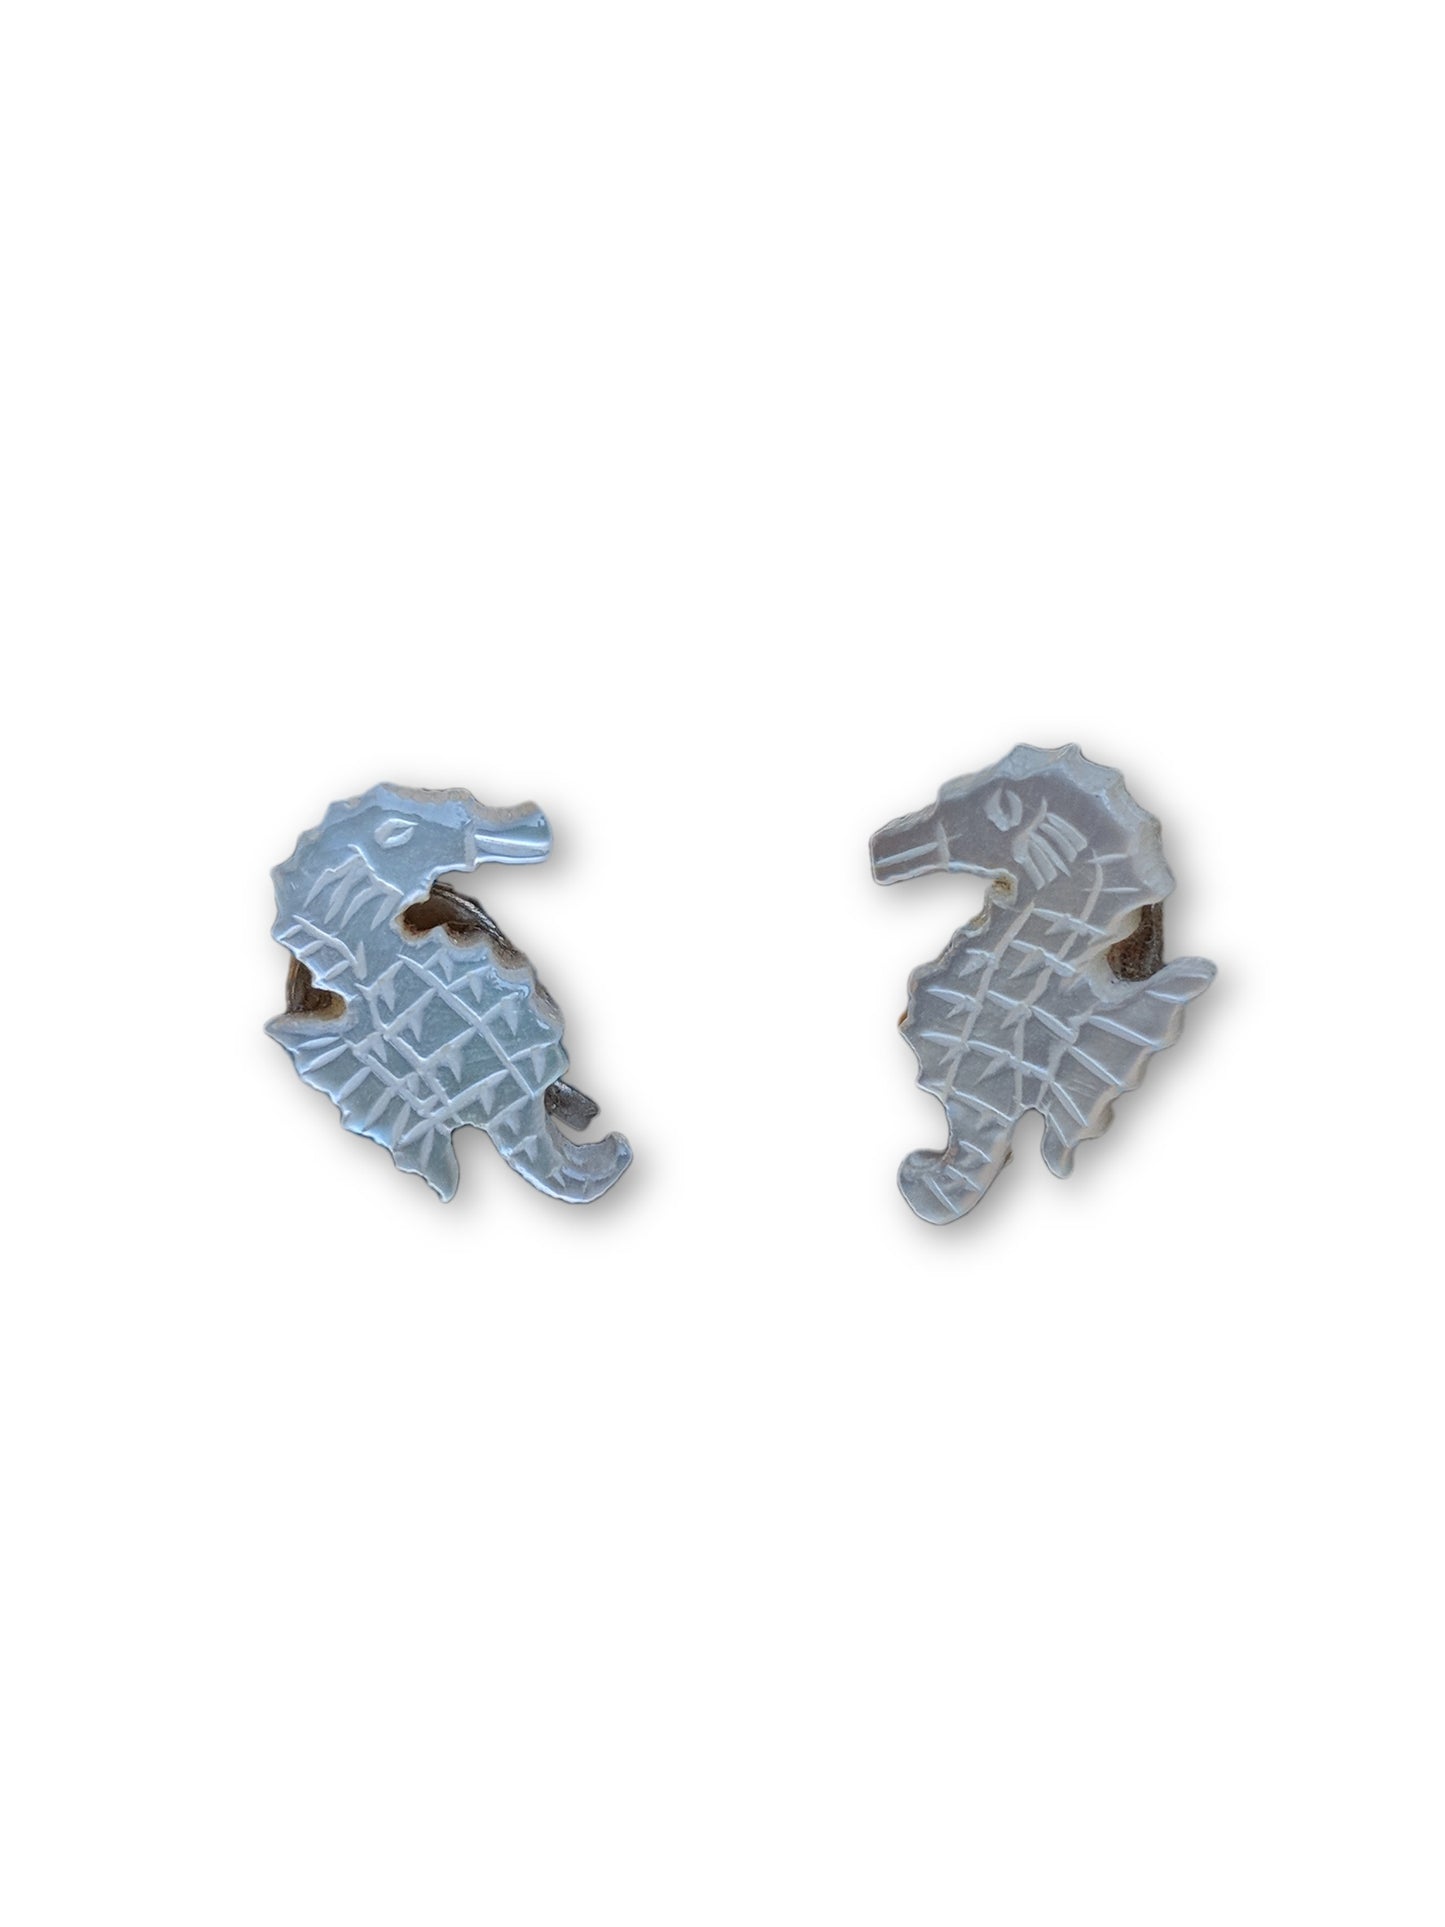 Vintage Seahorse Carved Shell Earrings